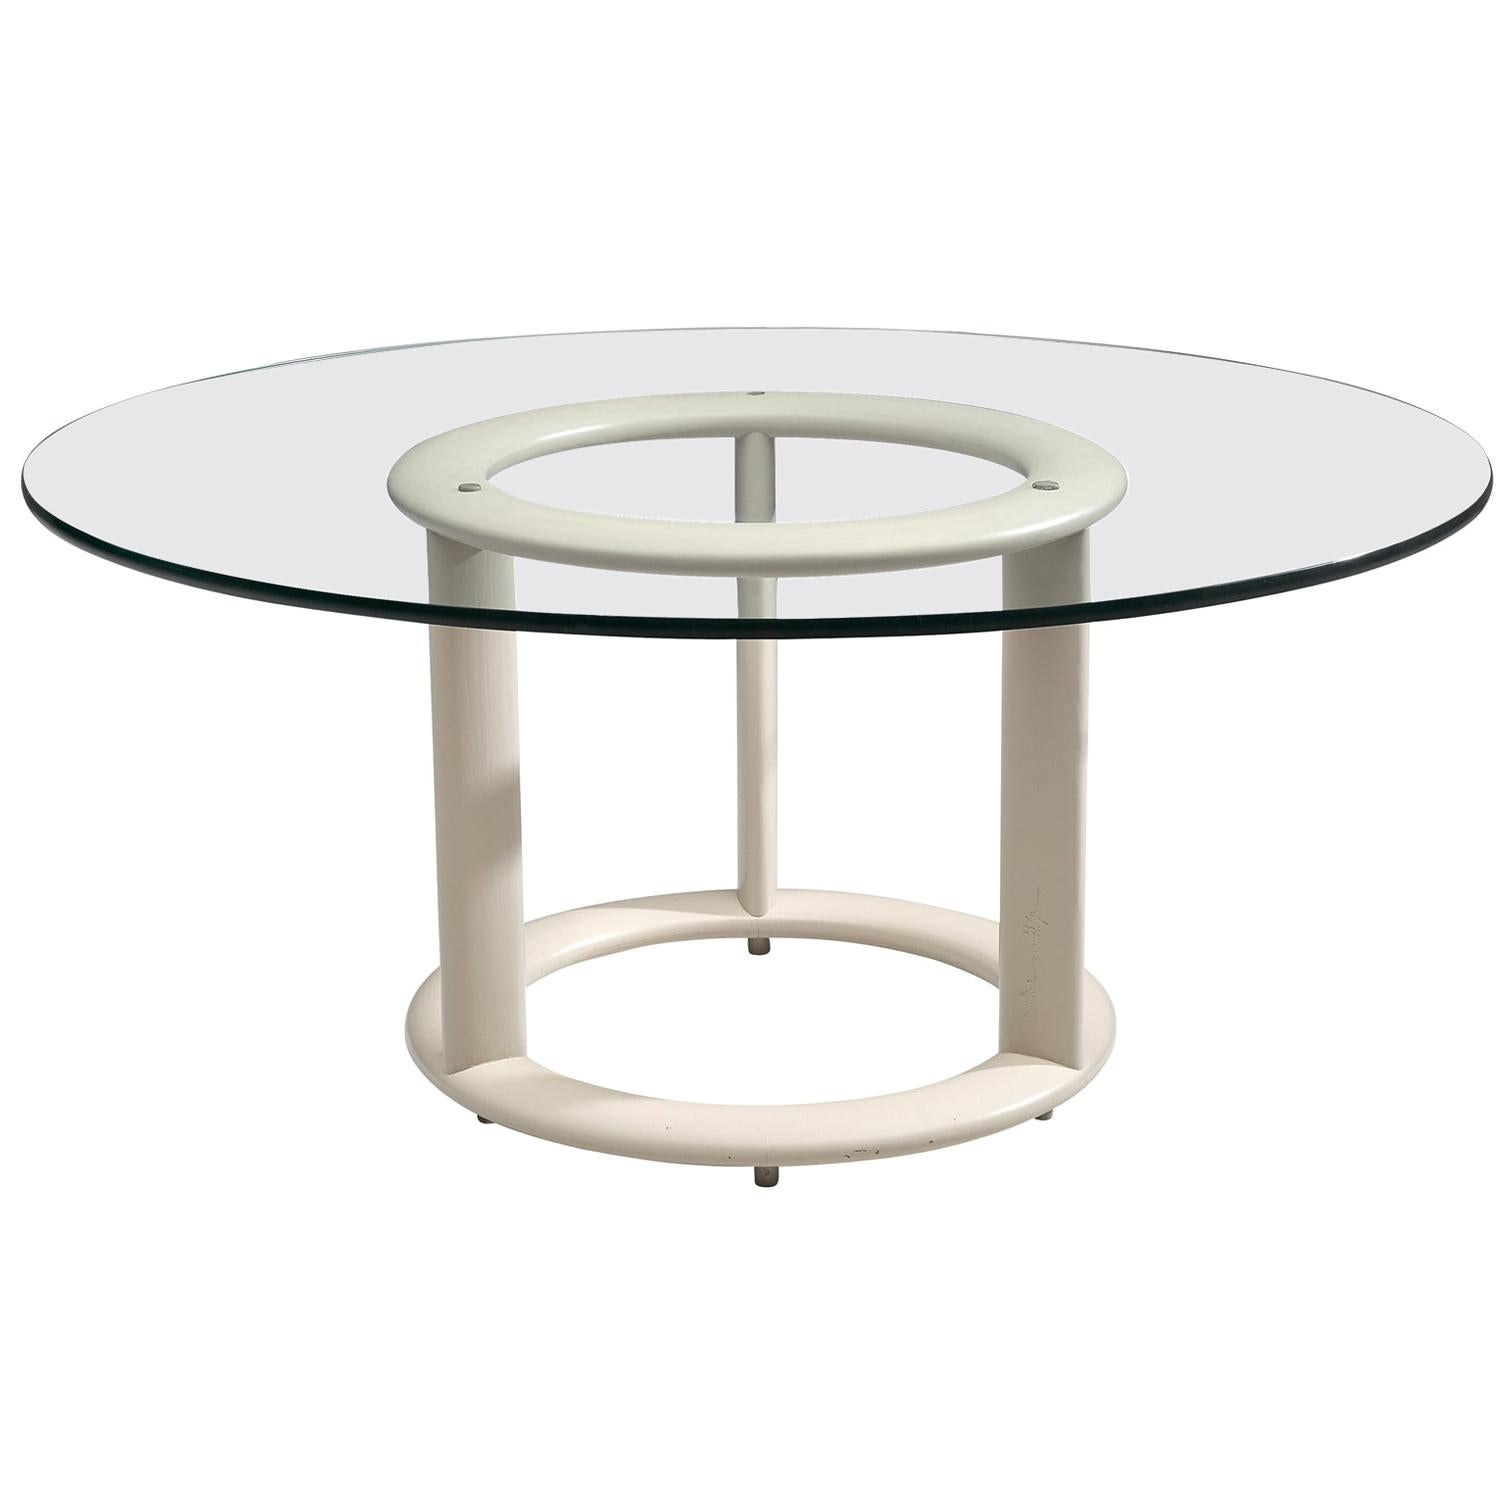 German Postmodern Round Dining Table with Glass Top